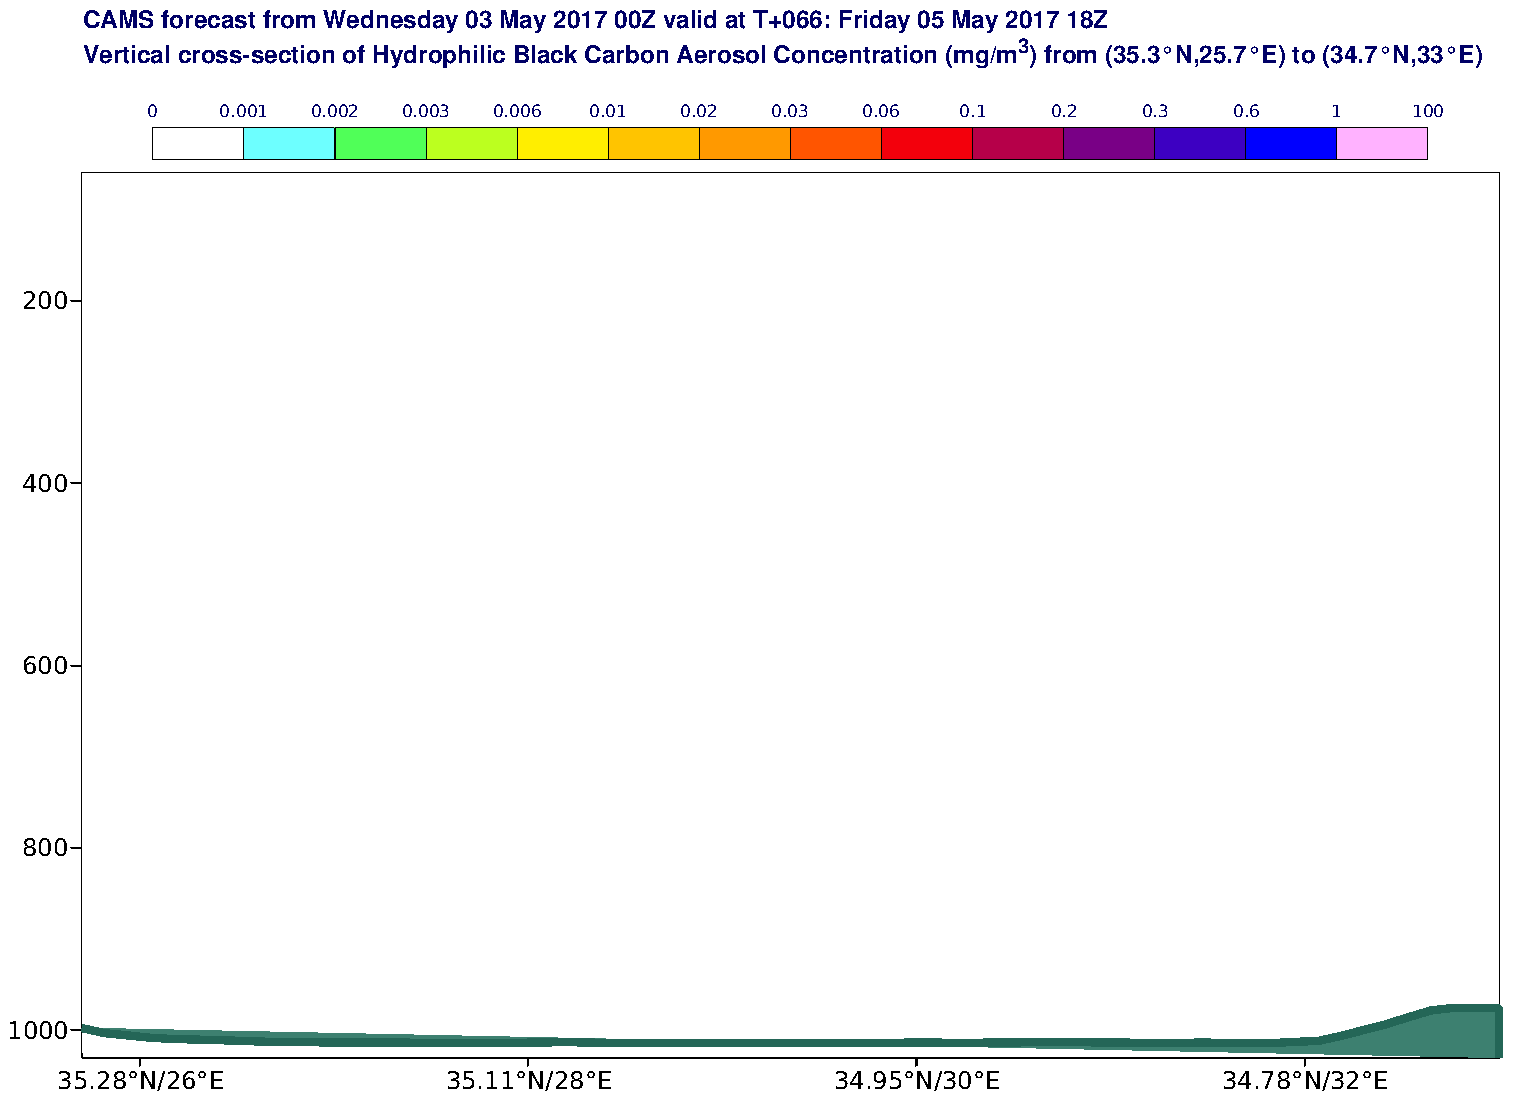 Vertical cross-section of Hydrophilic Black Carbon Aerosol Concentration (mg/m3) valid at T66 - 2017-05-05 18:00